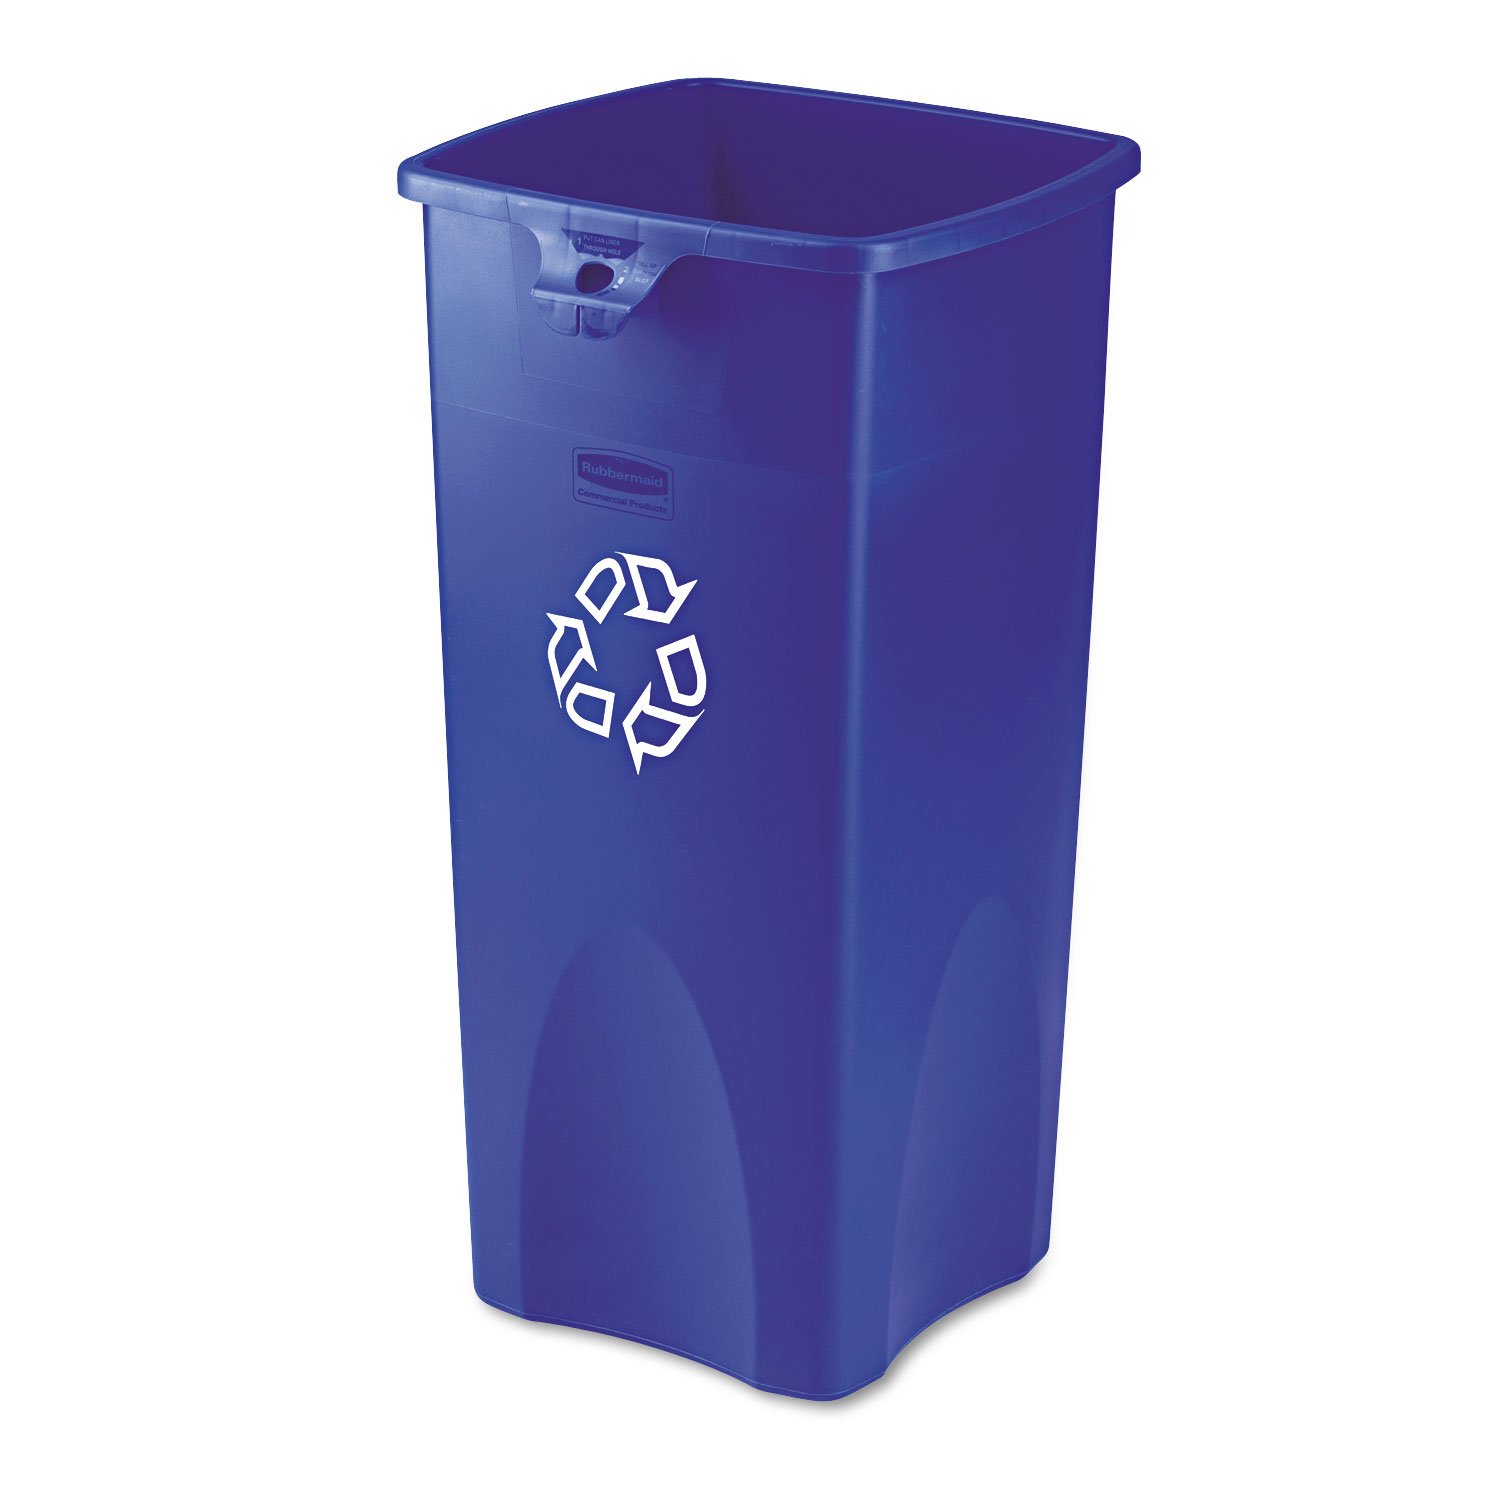  Rubbermaid Commercial FG356973BLUE Recycled Untouchable Square Recycling Container, Plastic, 23 gal, Blue (RCP356973BE) 